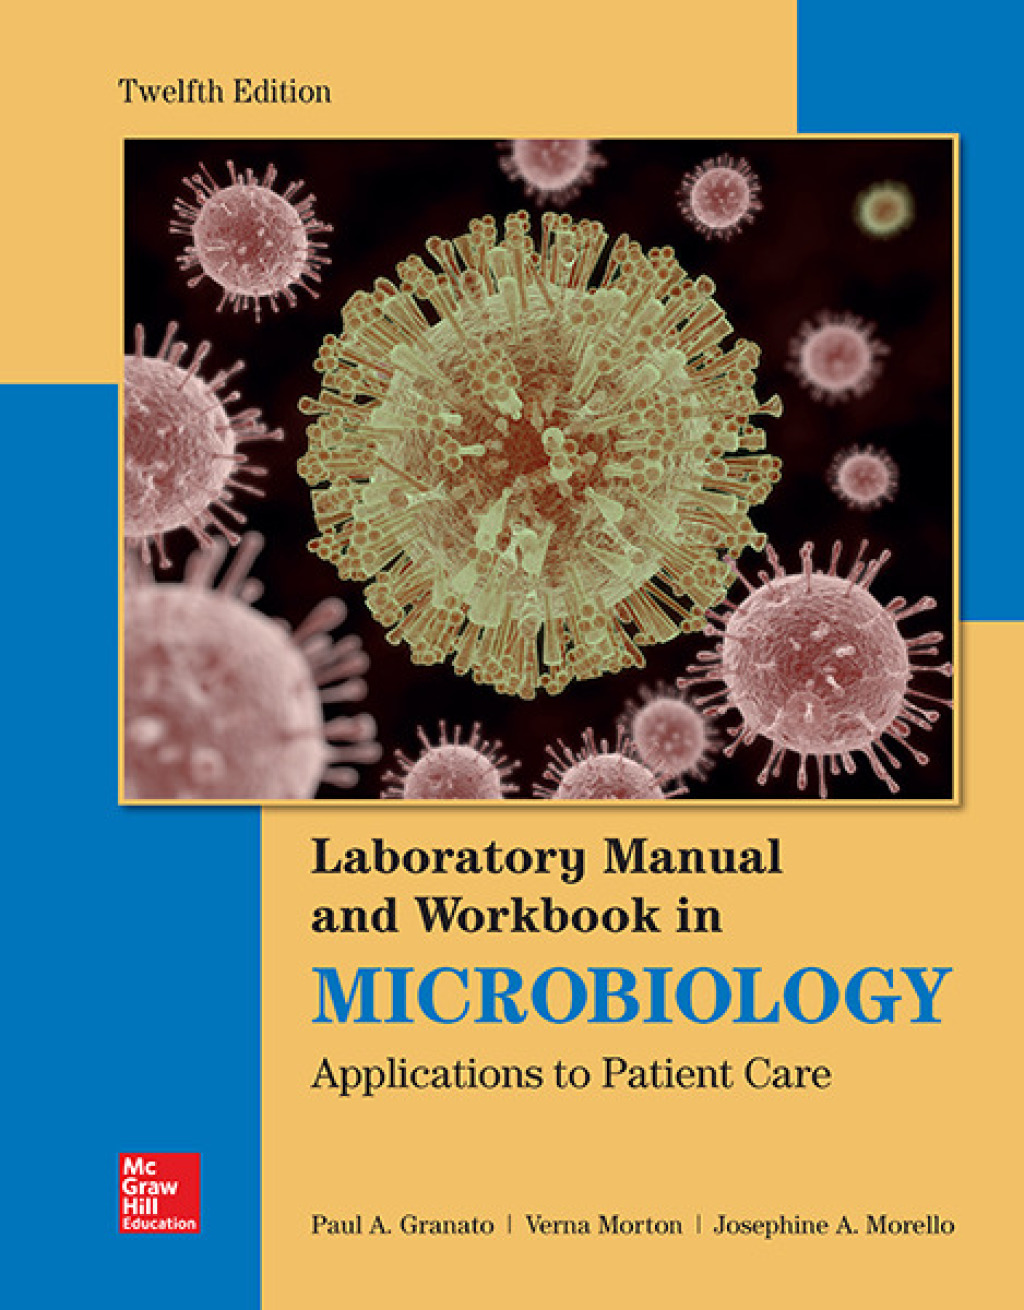 ISBN 9781260002188 product image for Lab Manual and Workbook in Microbiology: Applications to Patient Care - 12th Edi | upcitemdb.com